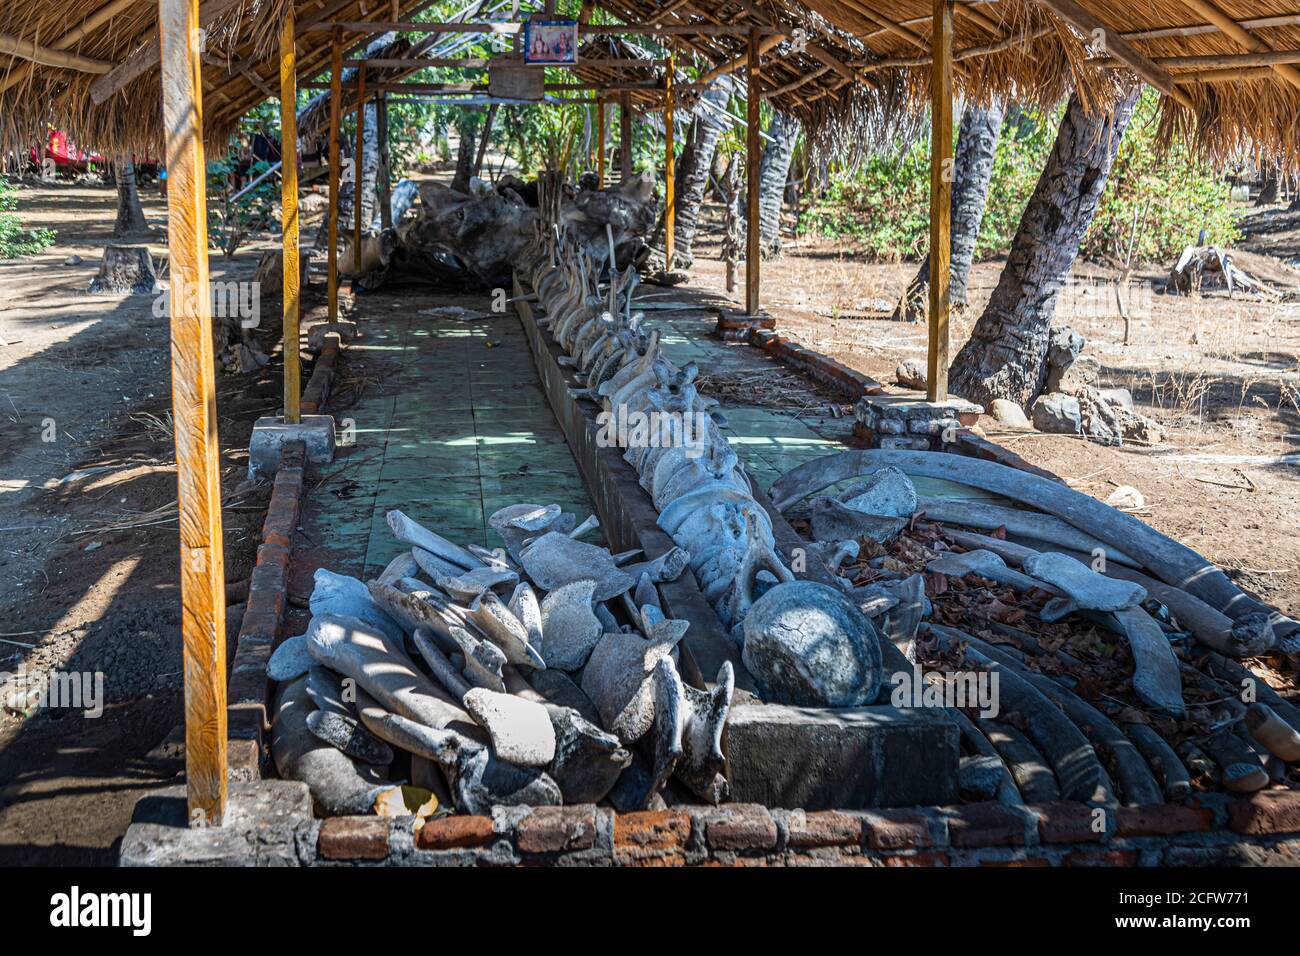 Skeleton of a whale under a roof, Sunda Islands, Indonesia Stock Photo